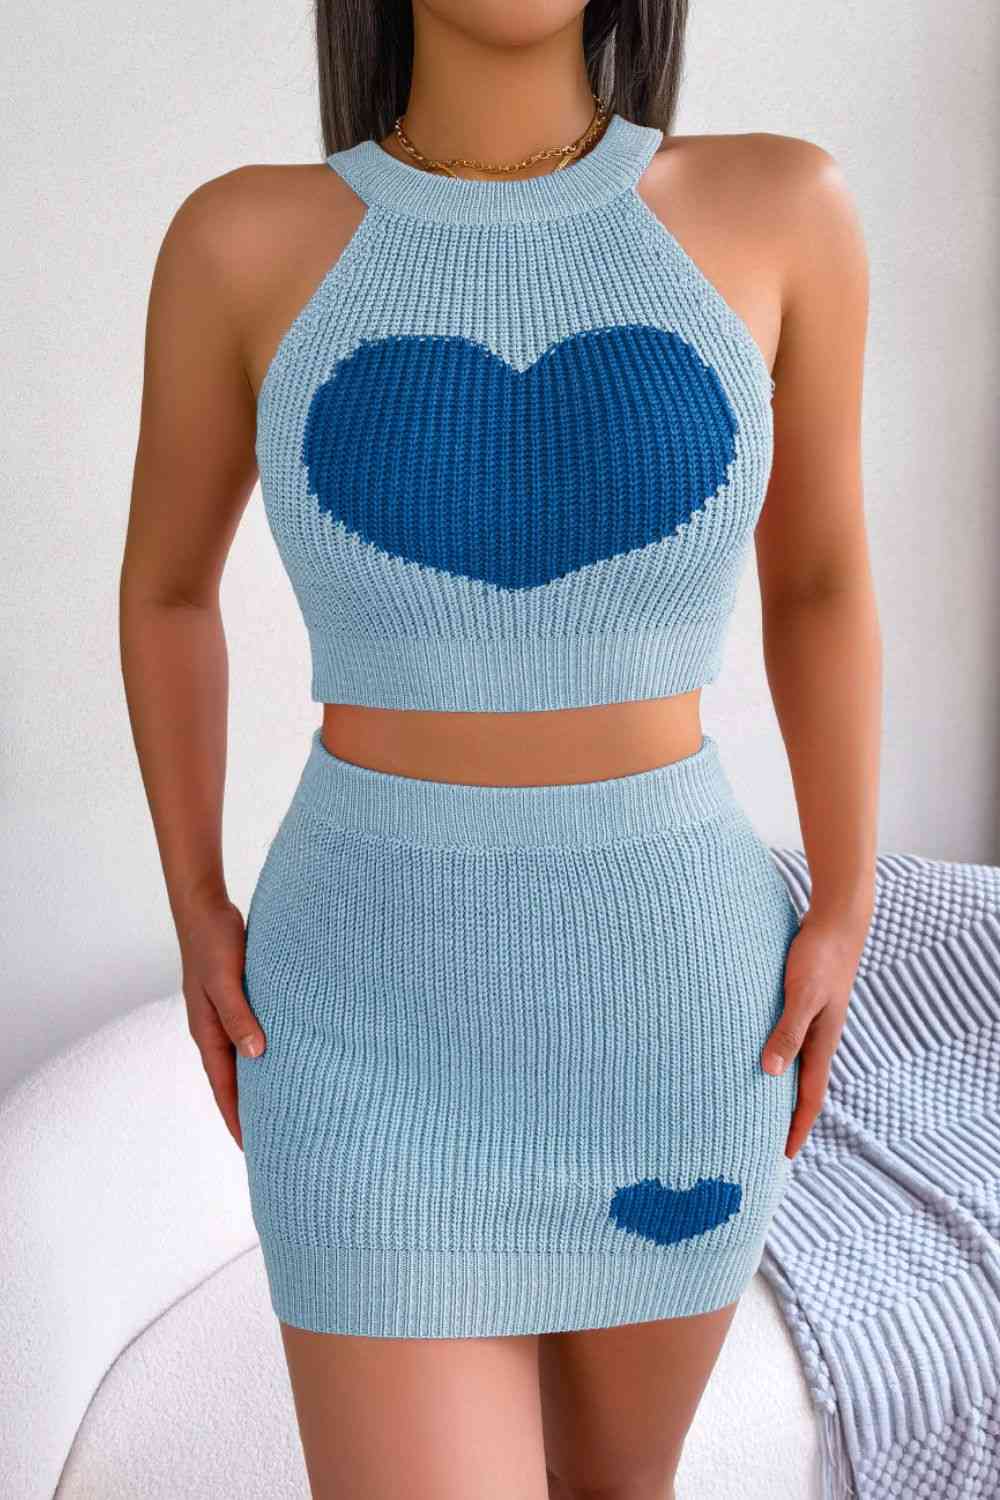 Women's Contrast Ribbed Sleeveless Knit Top and Skirt Set Sky Blue